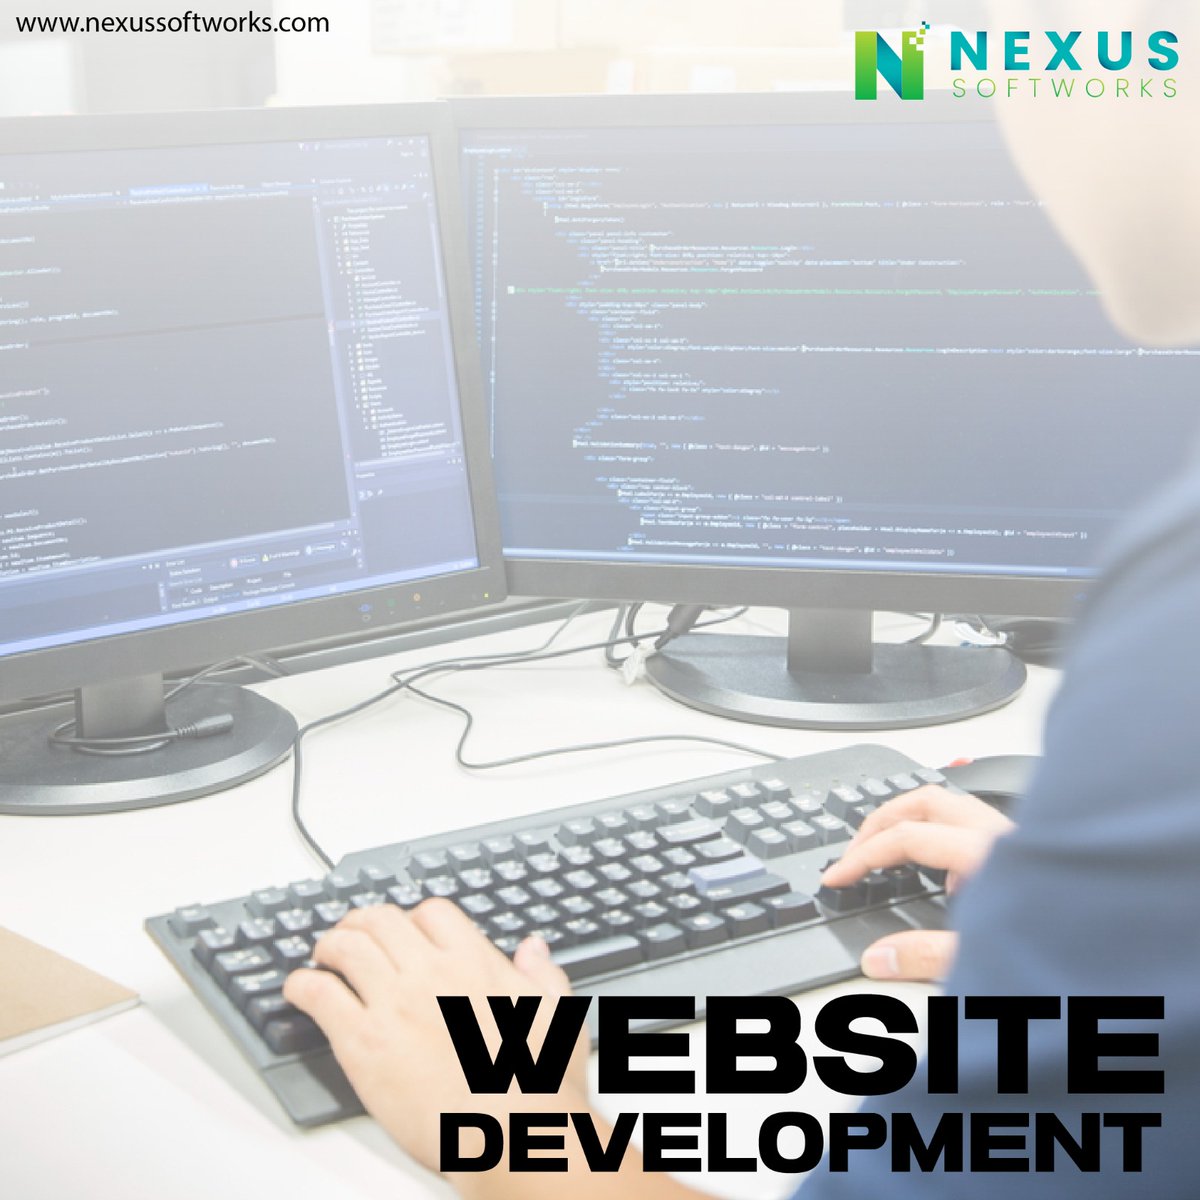 🌐 Your online identity starts here! Elevate your brand with our bespoke website development services. From sleek designs to seamless functionality, we've got you covered. Let's create your digital masterpiece!
.
.
#websiedevelopment #nexussoftworks #websitedesign